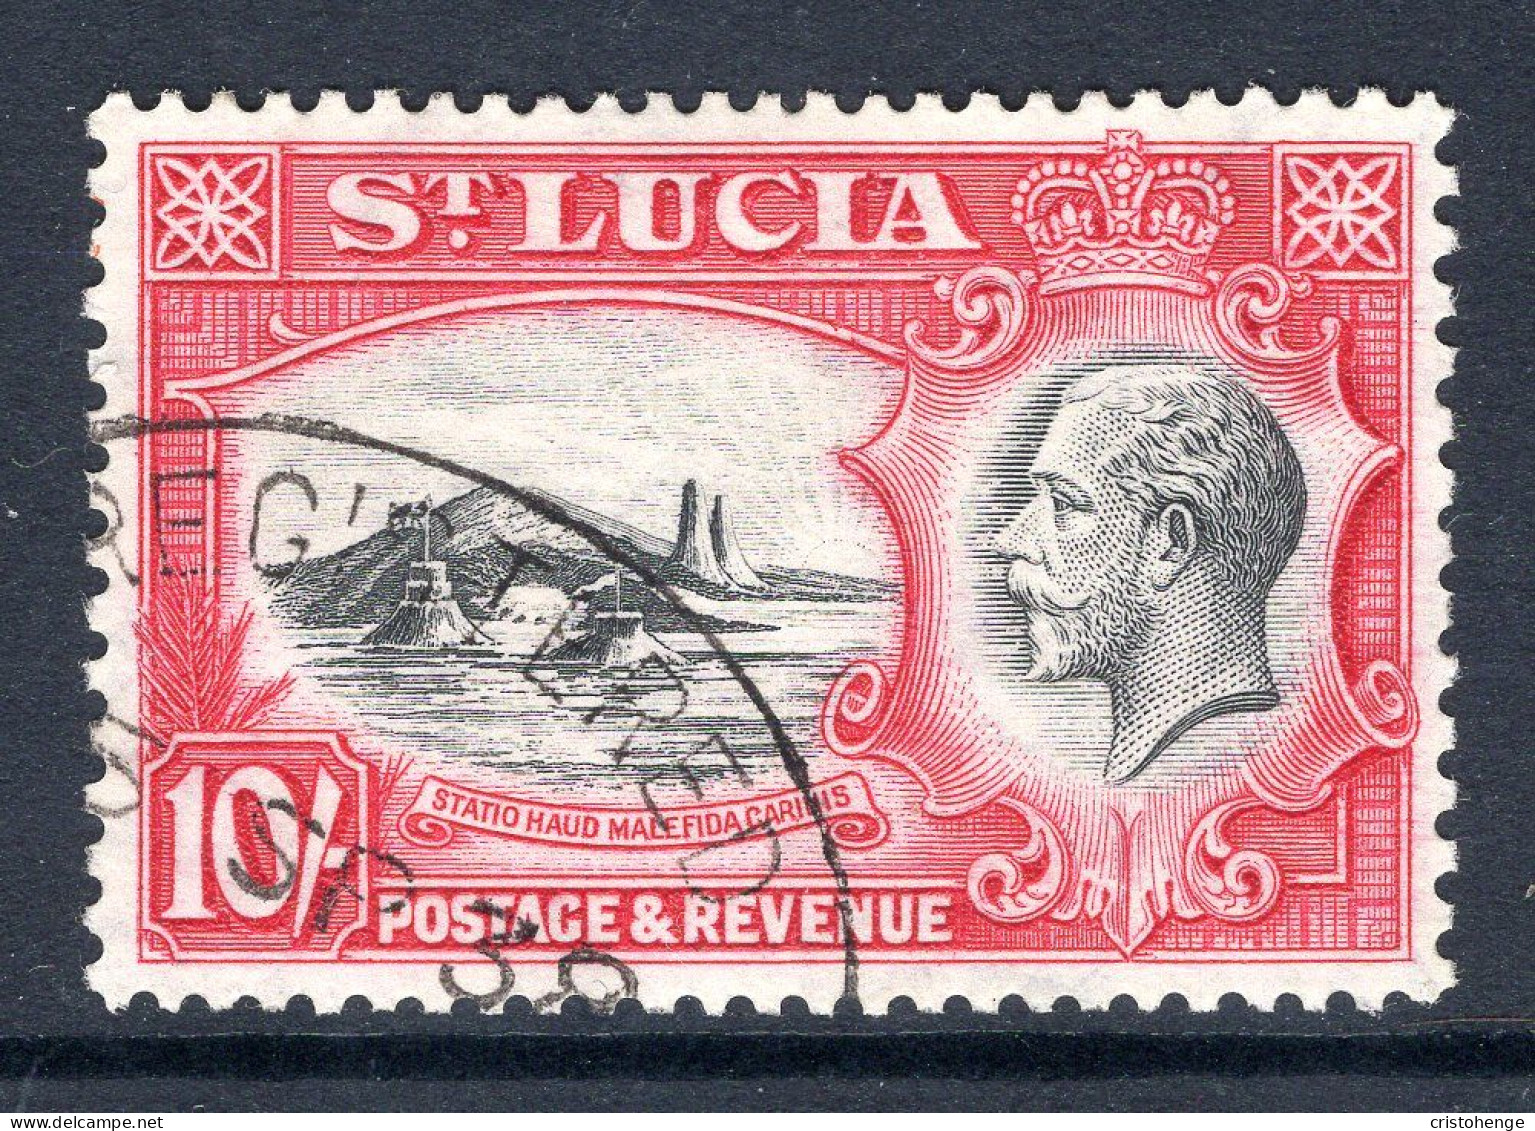 St Lucia 1936 KGV Pictorials - P.14 - 10/- Badge Of The Colony Used (SG 124) - Ste Lucie (...-1978)